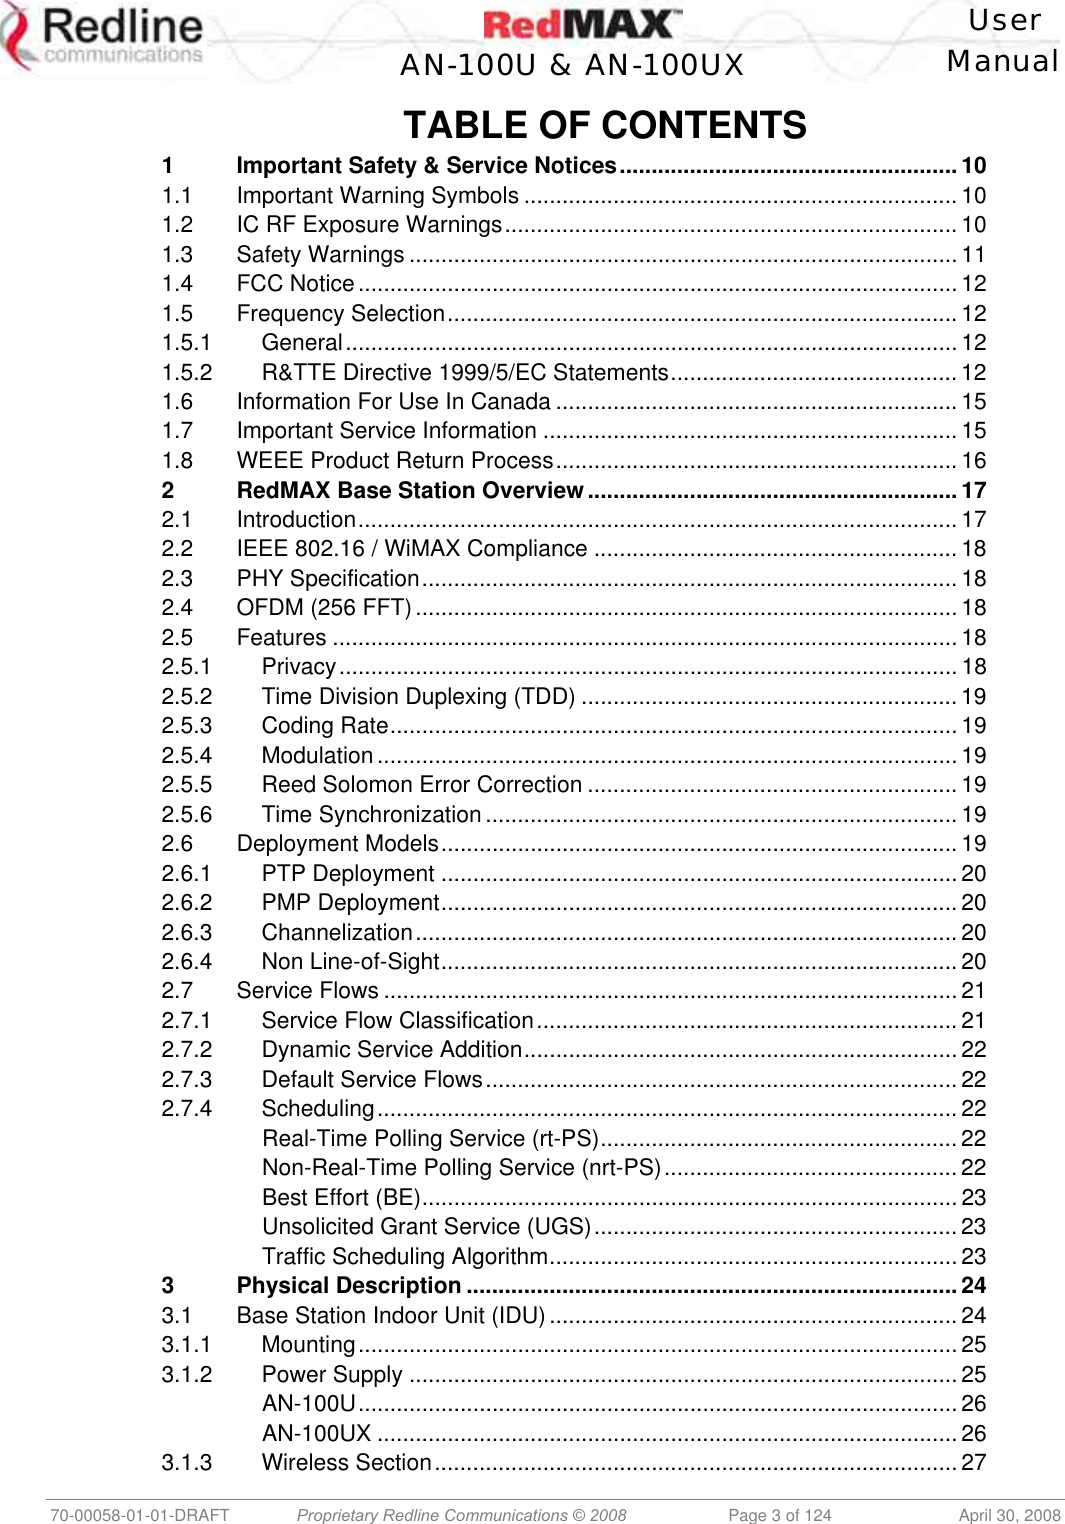    User  AN-100U &amp; AN-100UX Manual   70-00058-01-01-DRAFT  Proprietary Redline Communications © 2008   Page 3 of 124  April 30, 2008 TABLE OF CONTENTS 1 Important Safety &amp; Service Notices..................................................... 10 1.1 Important Warning Symbols .................................................................... 10 1.2 IC RF Exposure Warnings....................................................................... 10 1.3 Safety Warnings ...................................................................................... 11 1.4 FCC Notice.............................................................................................. 12 1.5 Frequency Selection................................................................................12 1.5.1 General................................................................................................ 12 1.5.2 R&amp;TTE Directive 1999/5/EC Statements............................................. 12 1.6 Information For Use In Canada ............................................................... 15 1.7 Important Service Information ................................................................. 15 1.8 WEEE Product Return Process............................................................... 16 2 RedMAX Base Station Overview.......................................................... 17 2.1 Introduction.............................................................................................. 17 2.2 IEEE 802.16 / WiMAX Compliance ......................................................... 18 2.3 PHY Specification.................................................................................... 18 2.4 OFDM (256 FFT)..................................................................................... 18 2.5 Features .................................................................................................. 18 2.5.1 Privacy................................................................................................. 18 2.5.2 Time Division Duplexing (TDD) ........................................................... 19 2.5.3 Coding Rate.........................................................................................19 2.5.4 Modulation ........................................................................................... 19 2.5.5 Reed Solomon Error Correction .......................................................... 19 2.5.6 Time Synchronization .......................................................................... 19 2.6 Deployment Models................................................................................. 19 2.6.1 PTP Deployment ................................................................................. 20 2.6.2 PMP Deployment.................................................................................20 2.6.3 Channelization..................................................................................... 20 2.6.4 Non Line-of-Sight.................................................................................20 2.7 Service Flows .......................................................................................... 21 2.7.1 Service Flow Classification.................................................................. 21 2.7.2 Dynamic Service Addition.................................................................... 22 2.7.3 Default Service Flows.......................................................................... 22 2.7.4 Scheduling........................................................................................... 22 Real-Time Polling Service (rt-PS)........................................................ 22 Non-Real-Time Polling Service (nrt-PS).............................................. 22 Best Effort (BE)....................................................................................23 Unsolicited Grant Service (UGS)......................................................... 23 Traffic Scheduling Algorithm................................................................23 3 Physical Description .............................................................................24 3.1 Base Station Indoor Unit (IDU)................................................................ 24 3.1.1 Mounting.............................................................................................. 25 3.1.2 Power Supply ...................................................................................... 25 AN-100U.............................................................................................. 26 AN-100UX ........................................................................................... 26 3.1.3 Wireless Section.................................................................................. 27 